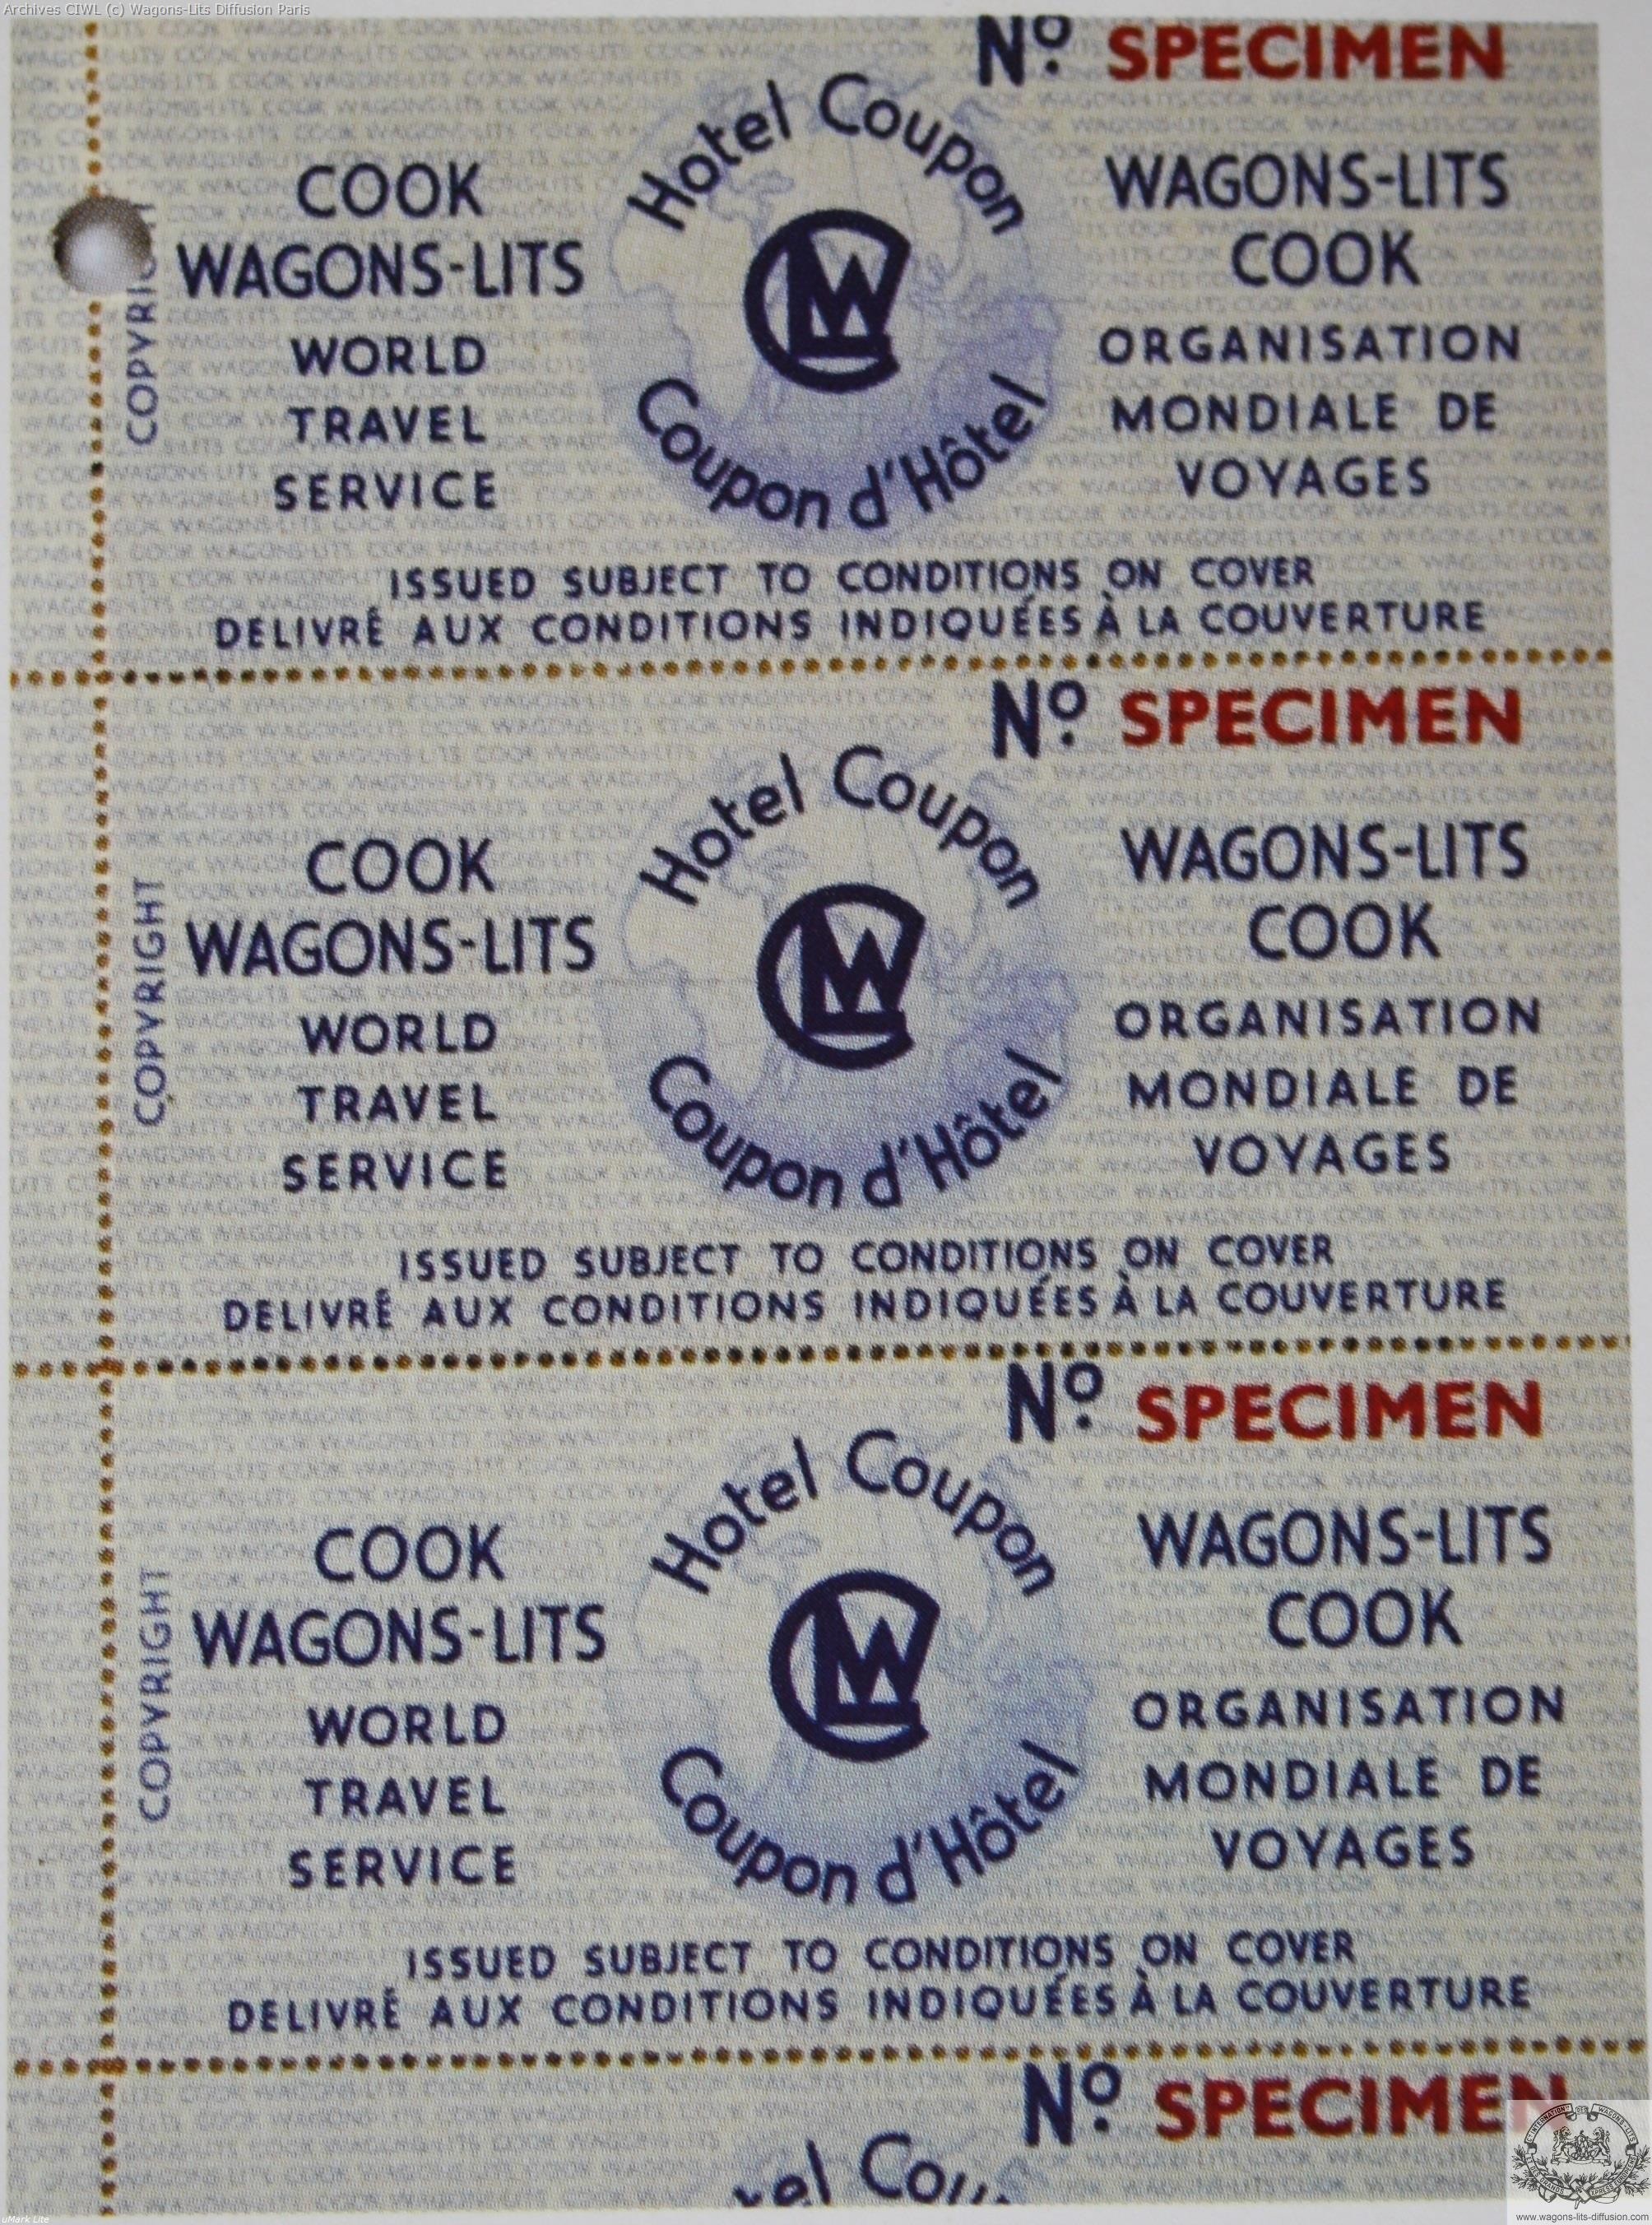 Wl cook coupon reservation hotels 1935